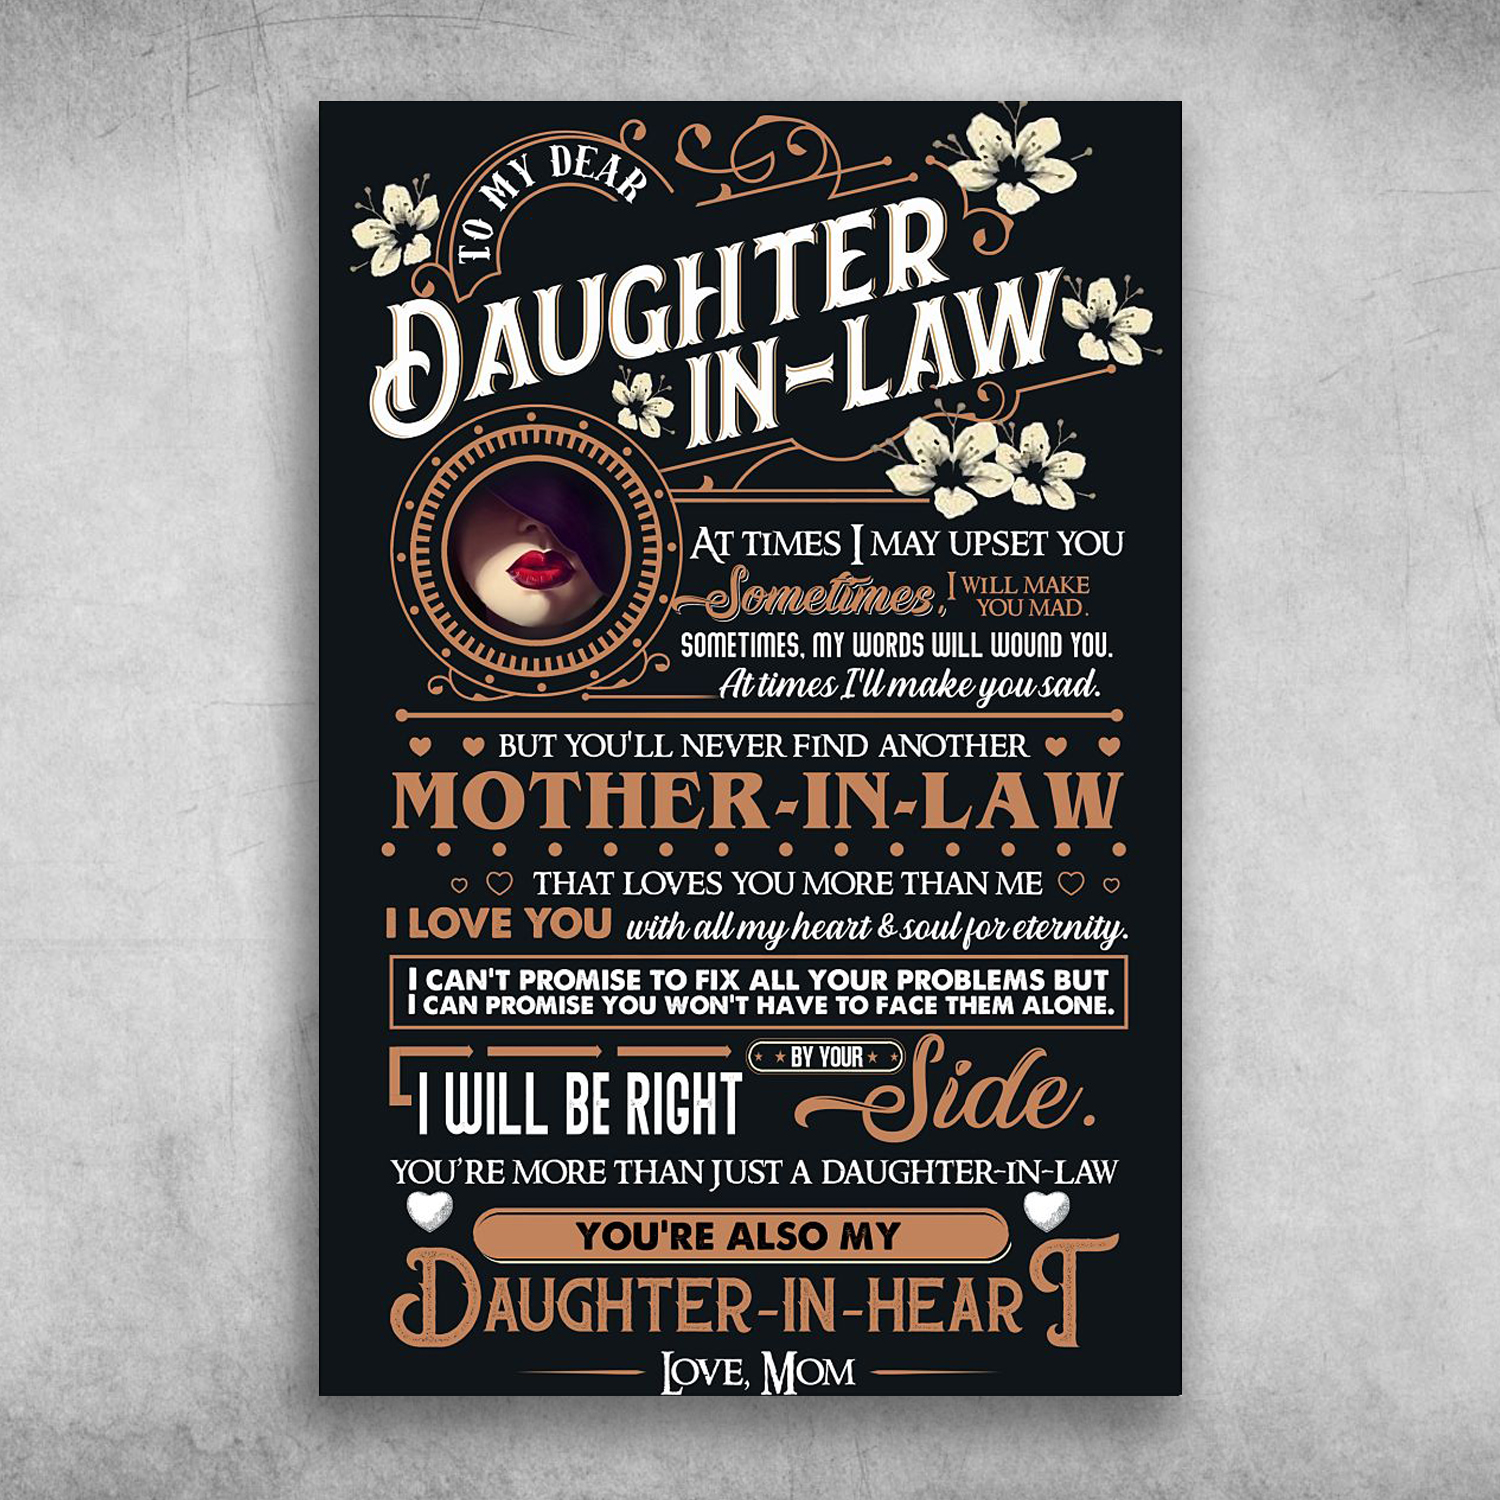 To My Dear Daughter In law I Will Be Right By Your Side